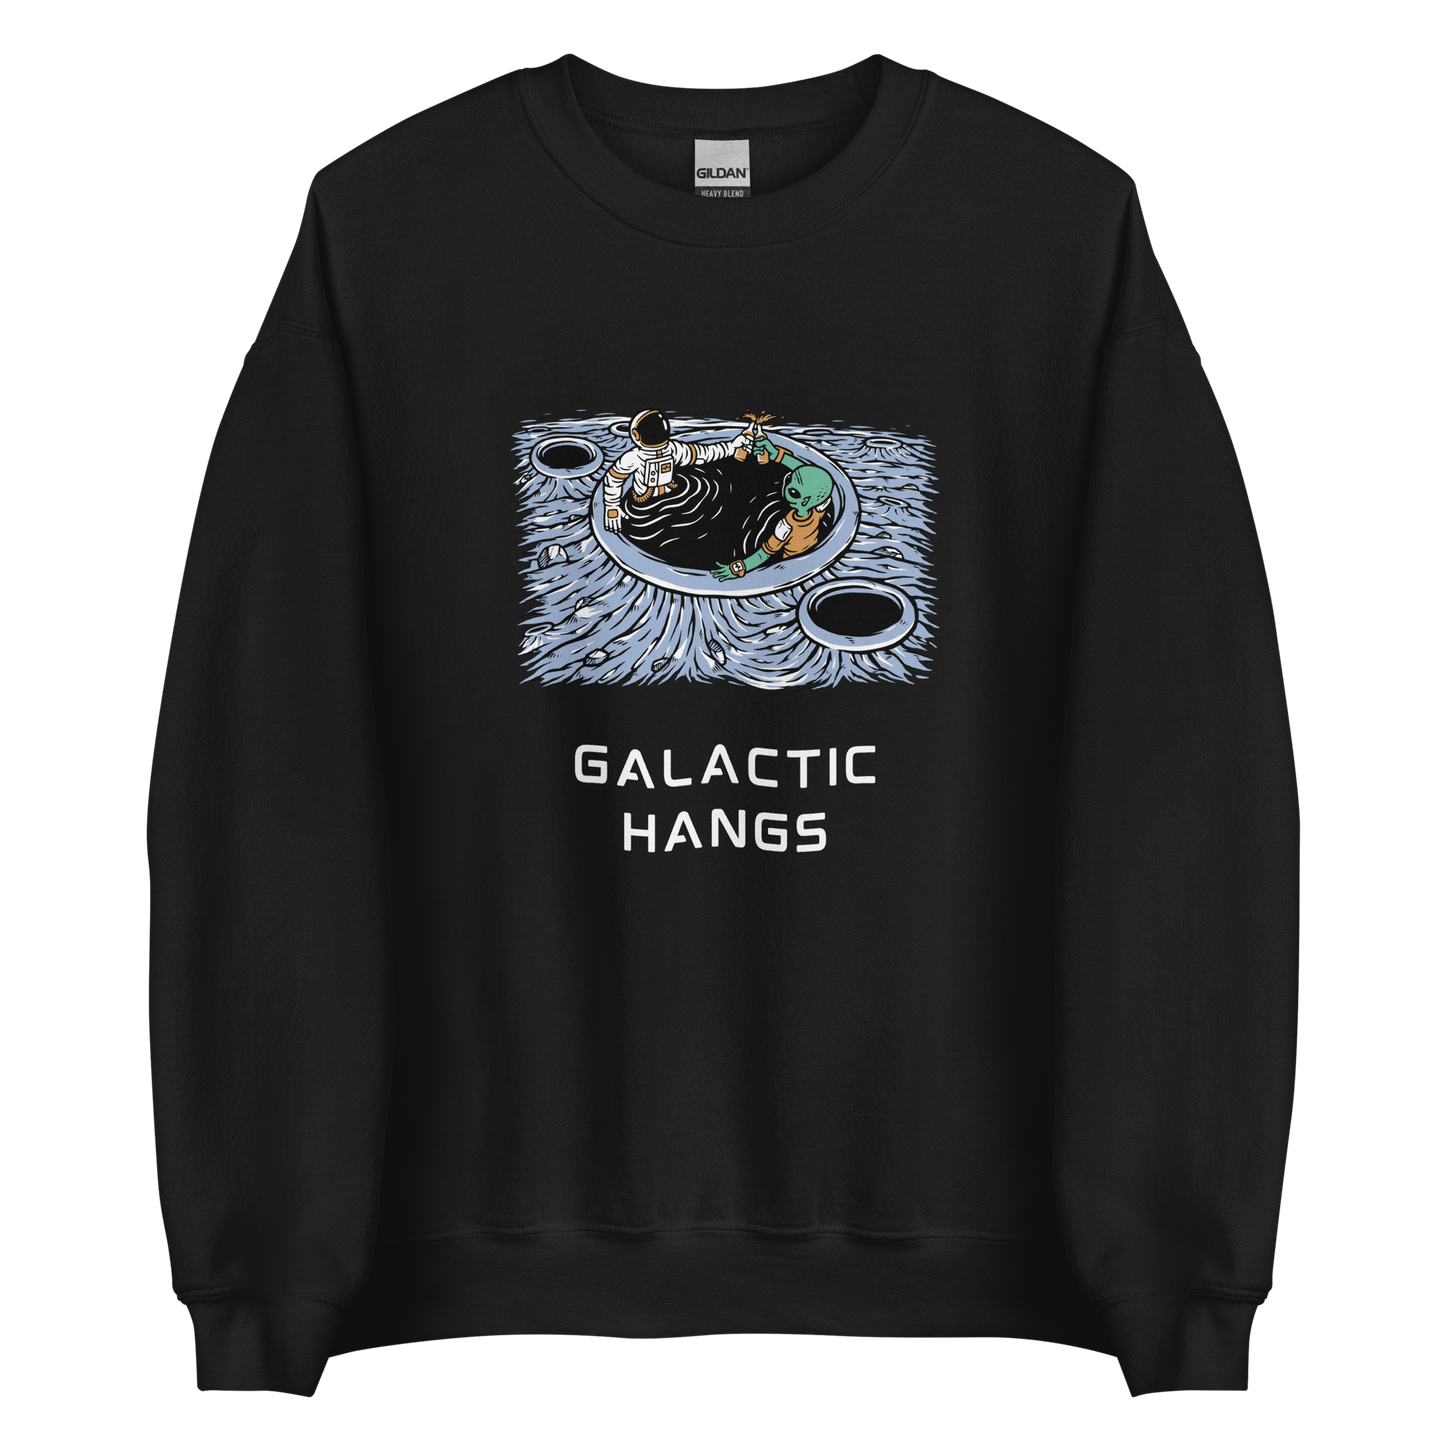 Black Galactic Hangs Sweatshirt featuring an out-of-this-world graphic of an Astronaut and Alien Chilling Together - Funny Graphic Space Sweatshirts - Boozy Fox